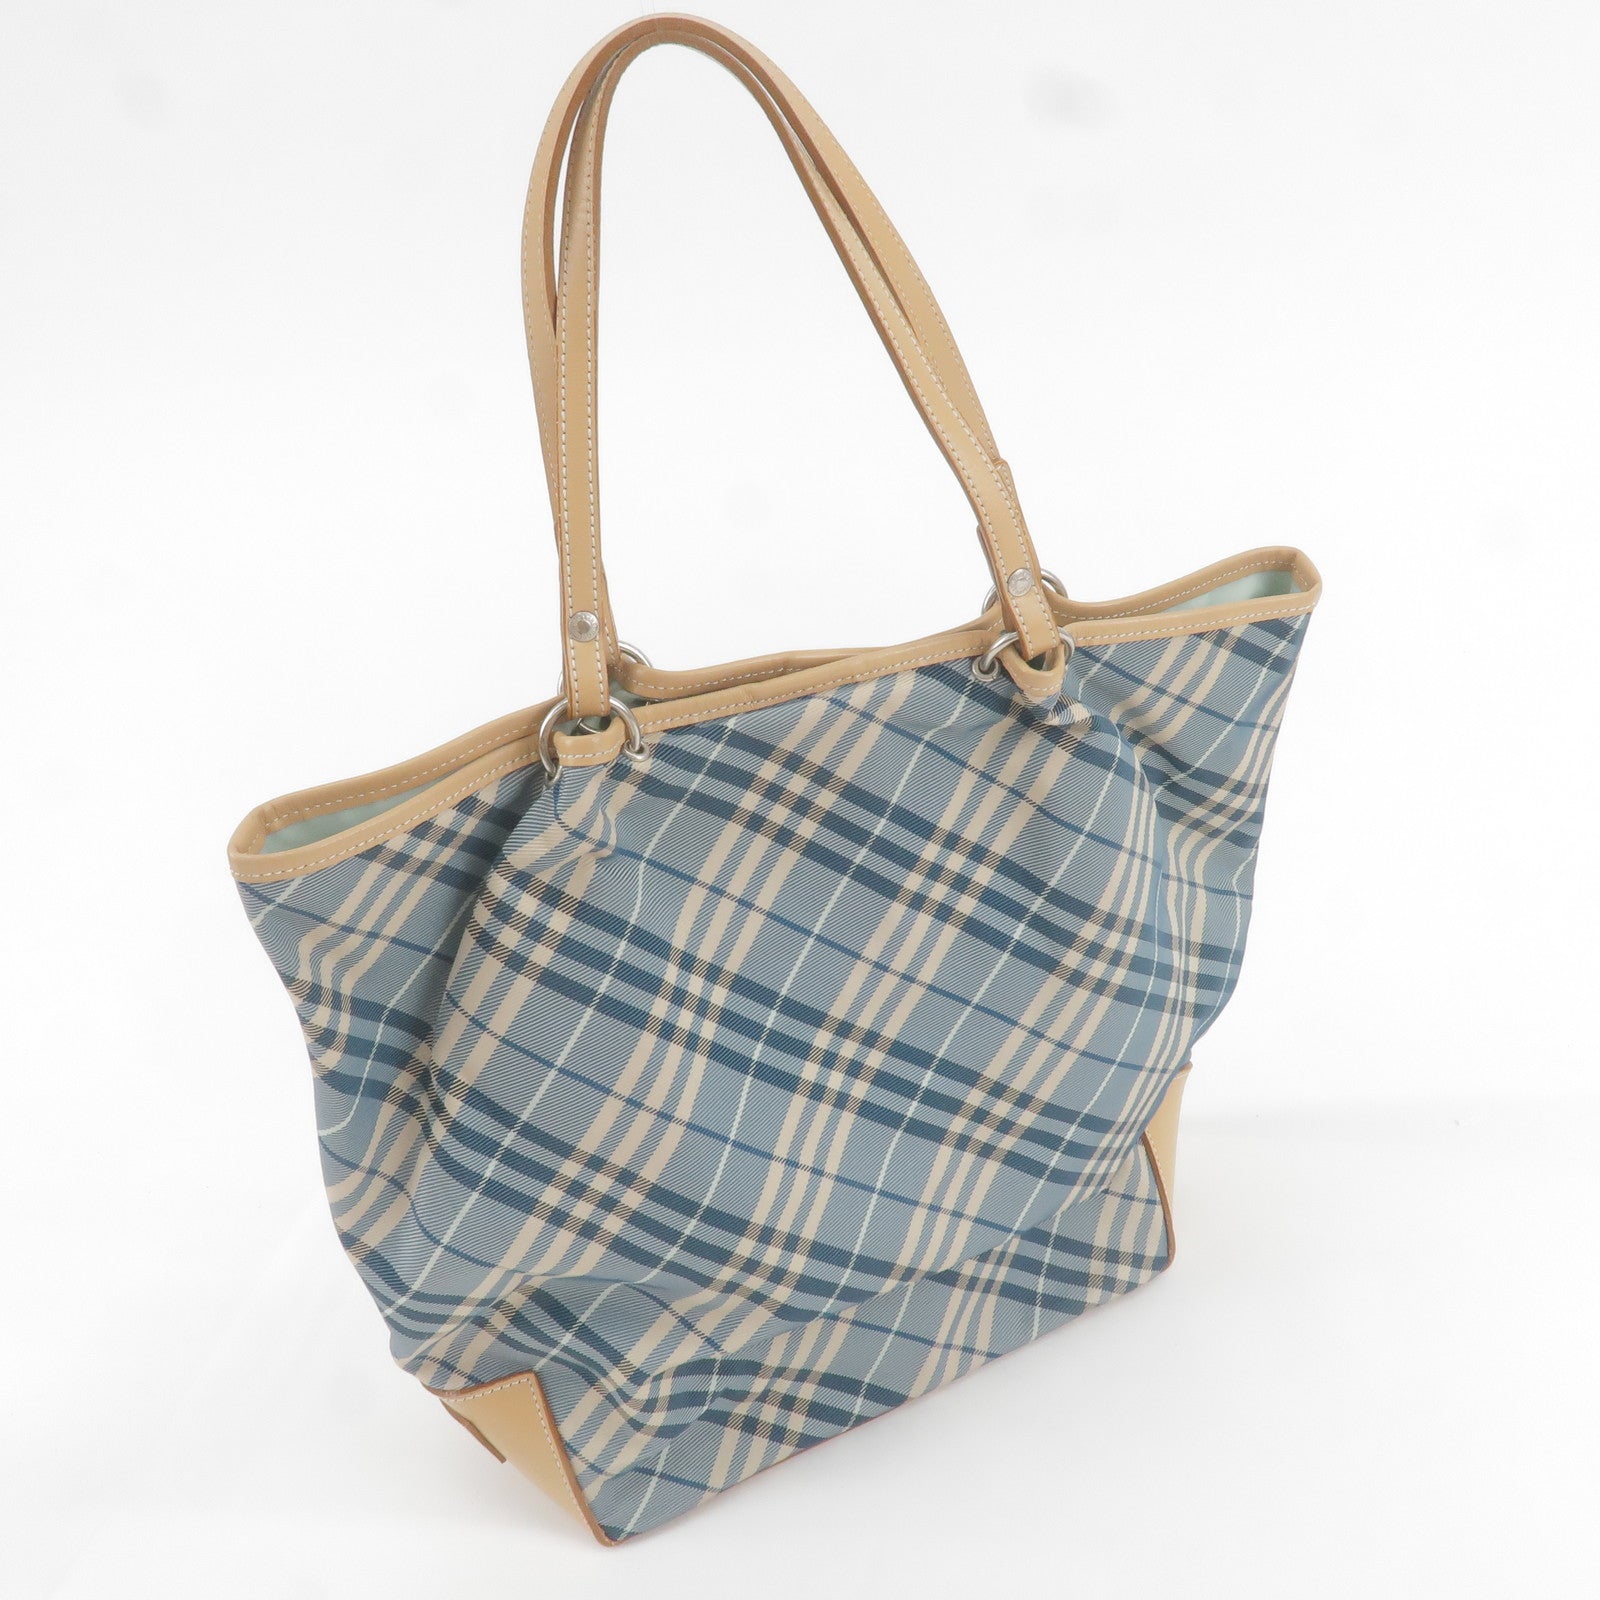 Burberry Pre-Owned Pre-Owned Coats - Canvas - Plaid - BURBERRY - Tote -  Beige – dct - Leather - Blue - Nova - Bag - ep_vintage luxury Store - Blue  - Label